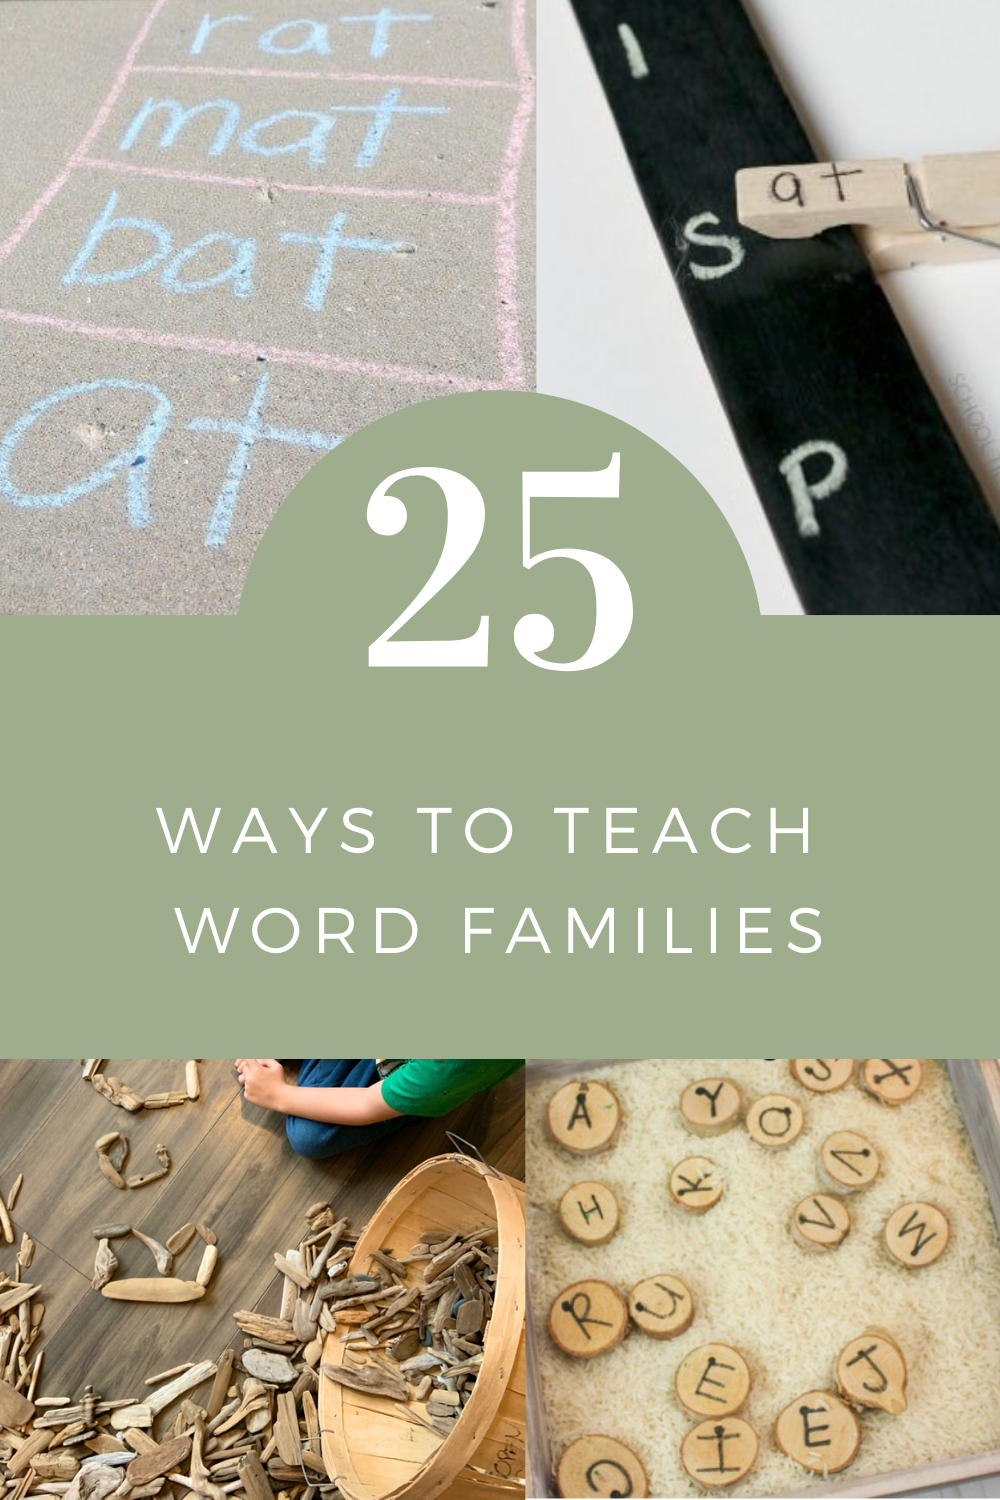 25+ Ways to Practice Word Families at Home